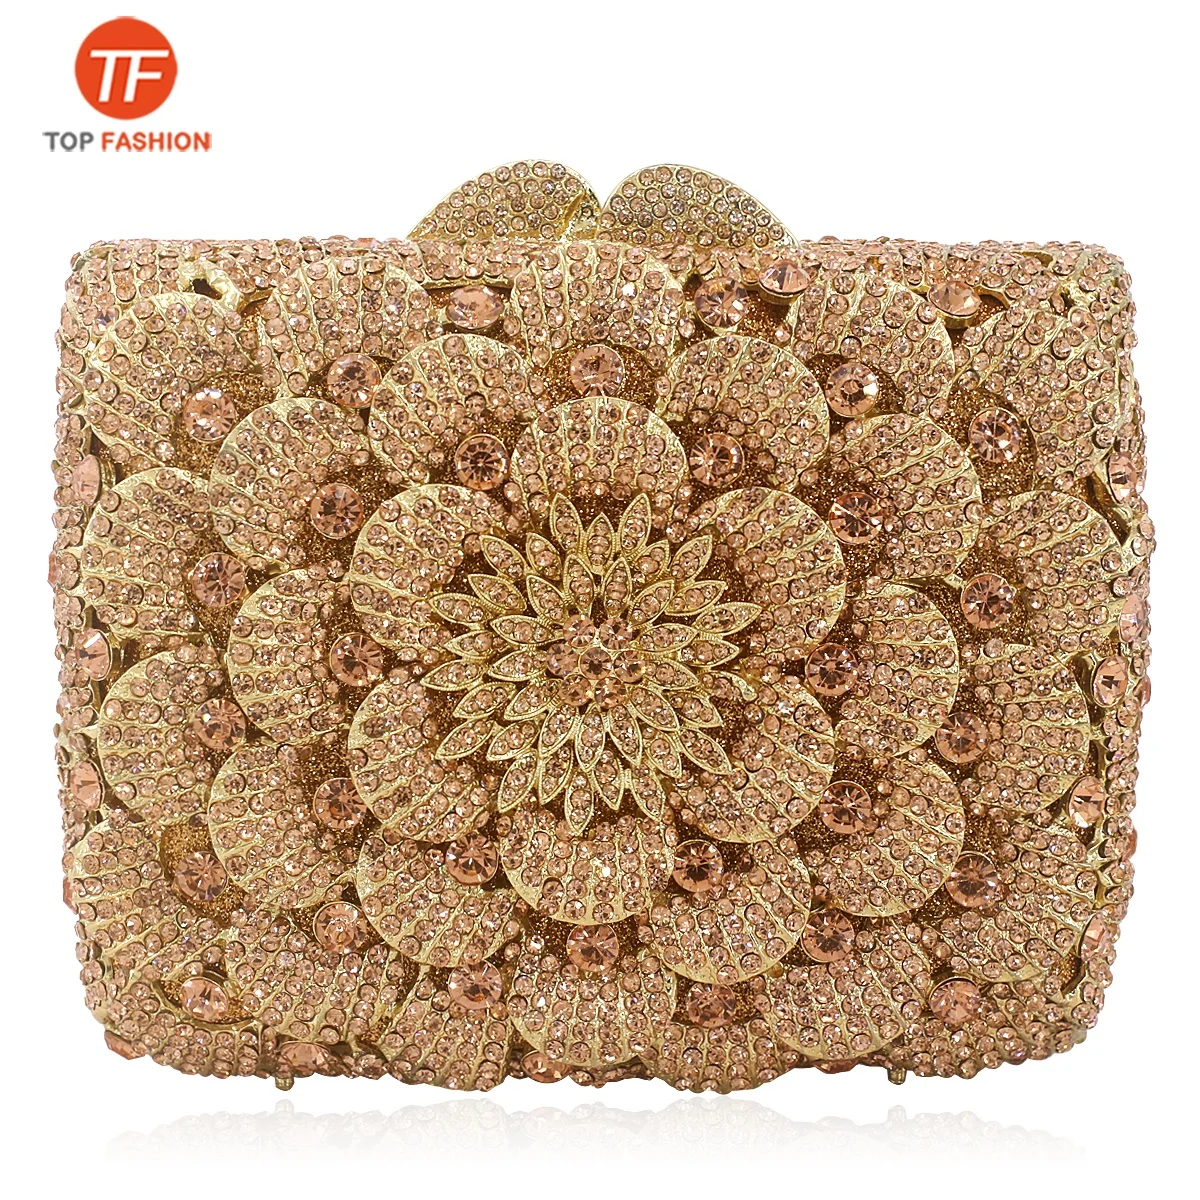 

China Factory Wholesales Crystal Rhinestone Clutch Evening Bag for Formal Party Florals Clutch Purse, ( accept customized )